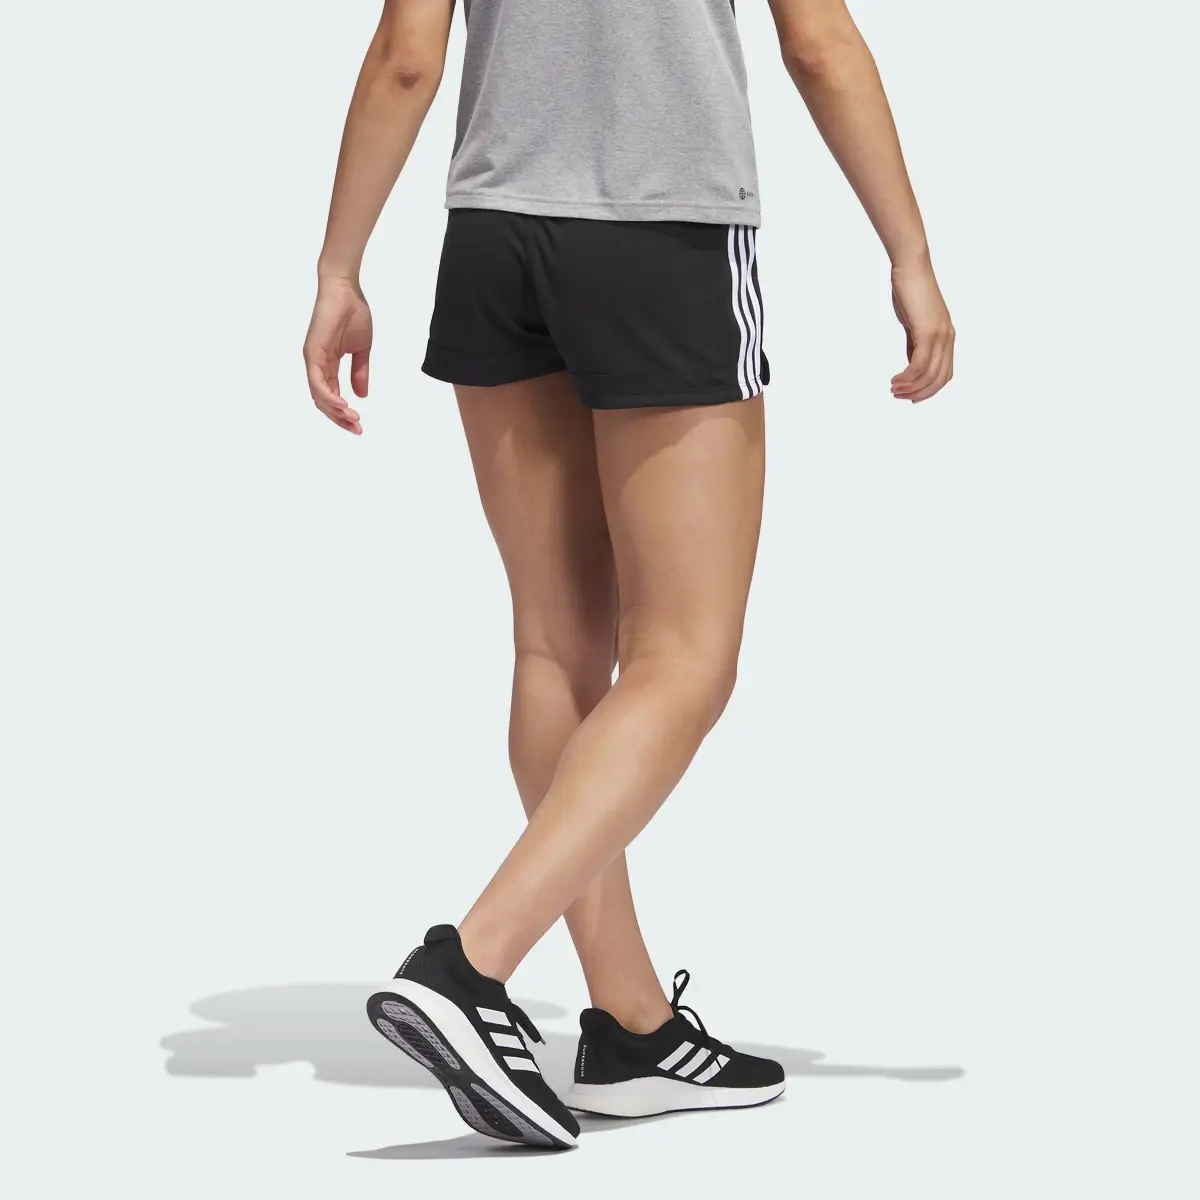 Adidas Short Pacer 3-Stripes Knit. 2